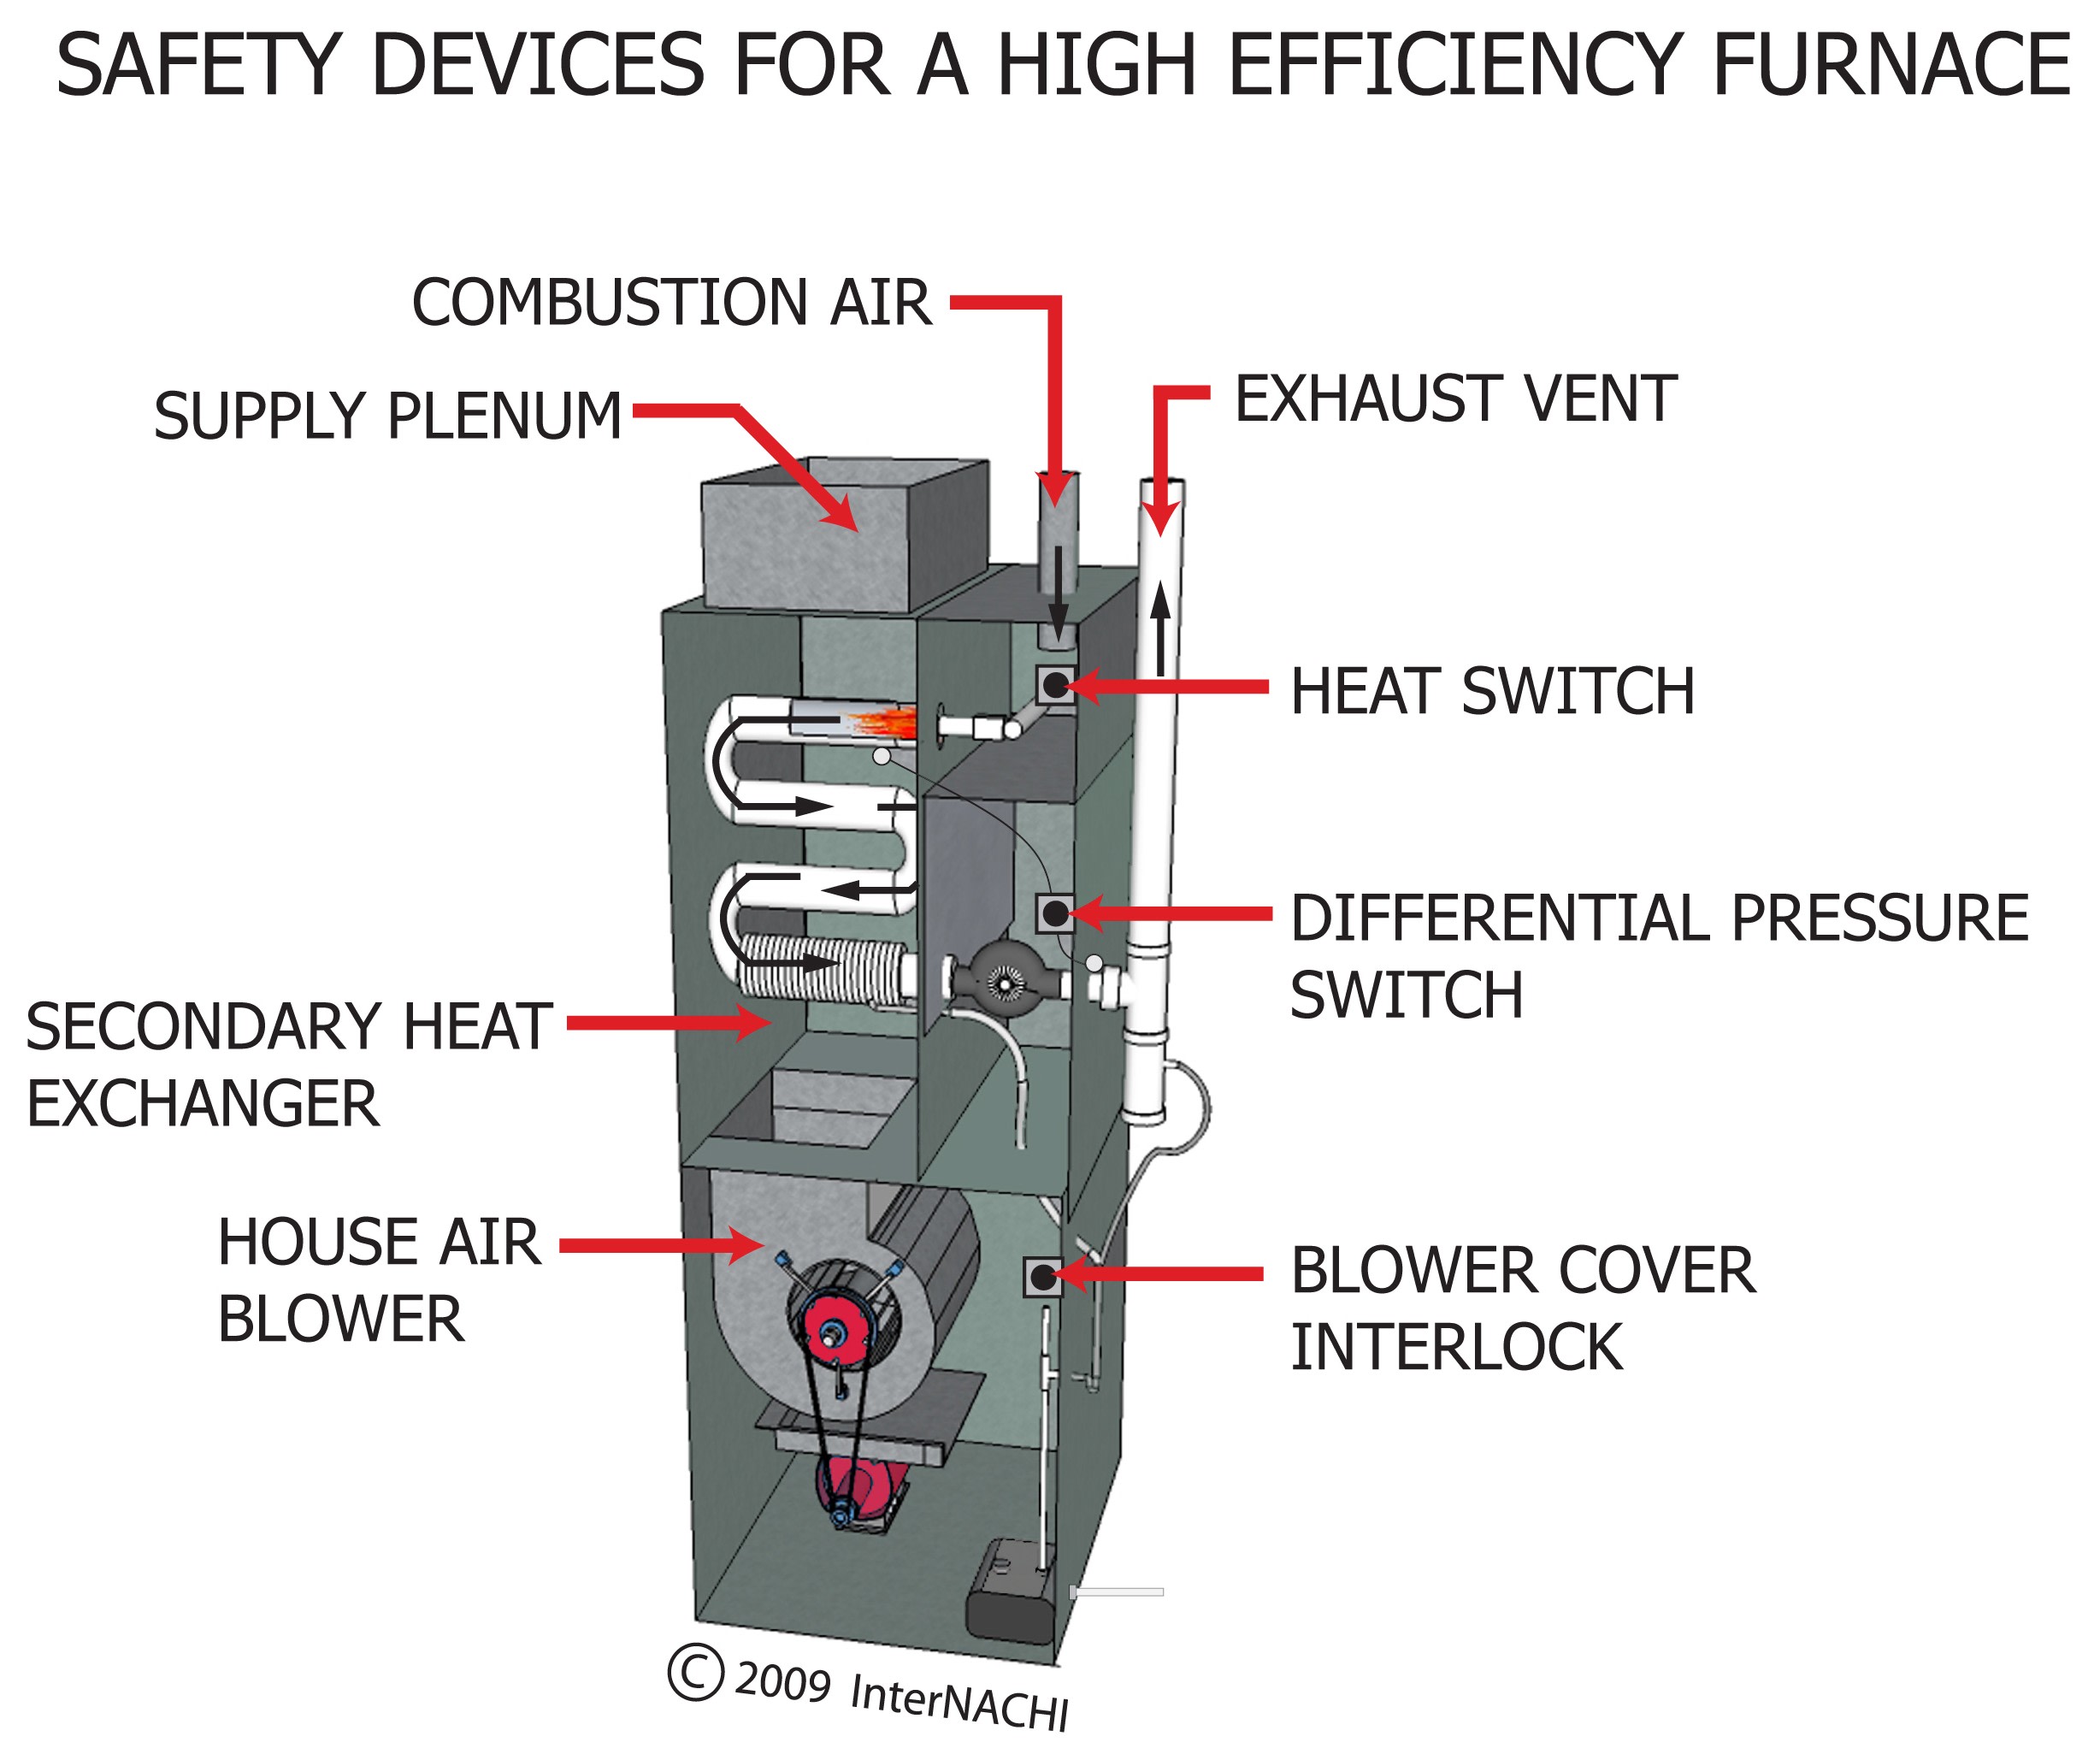 Safety devices for a high-efficiency furnace.